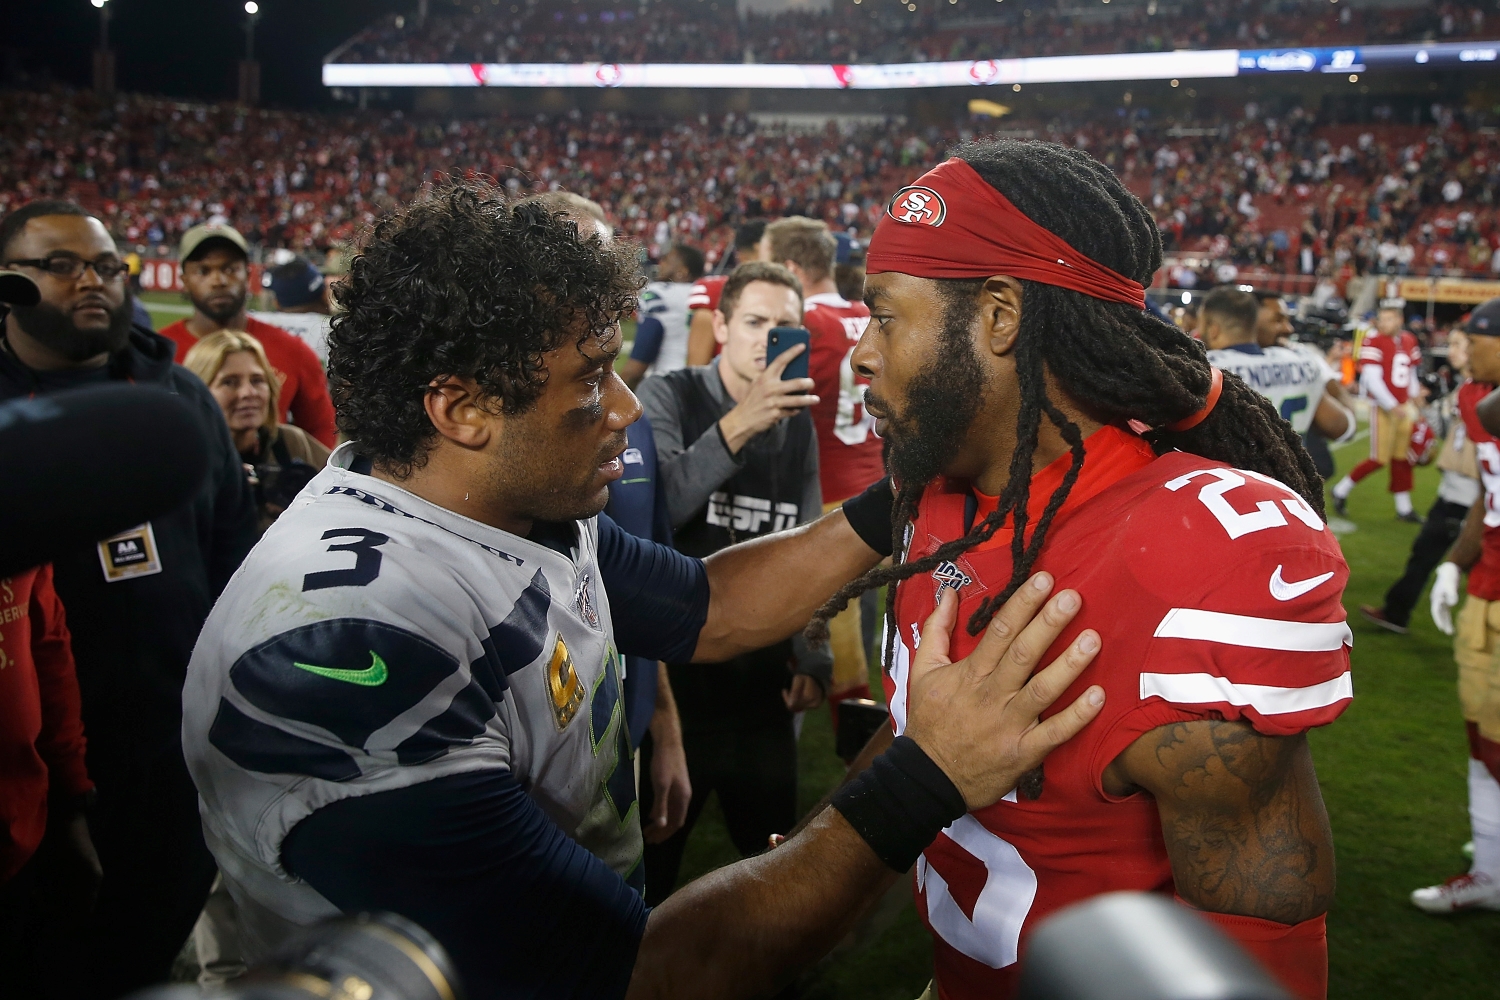 Seattle Seahawks quarterback Russell Wilson speaks to former teammate Richard Sherman after a game.